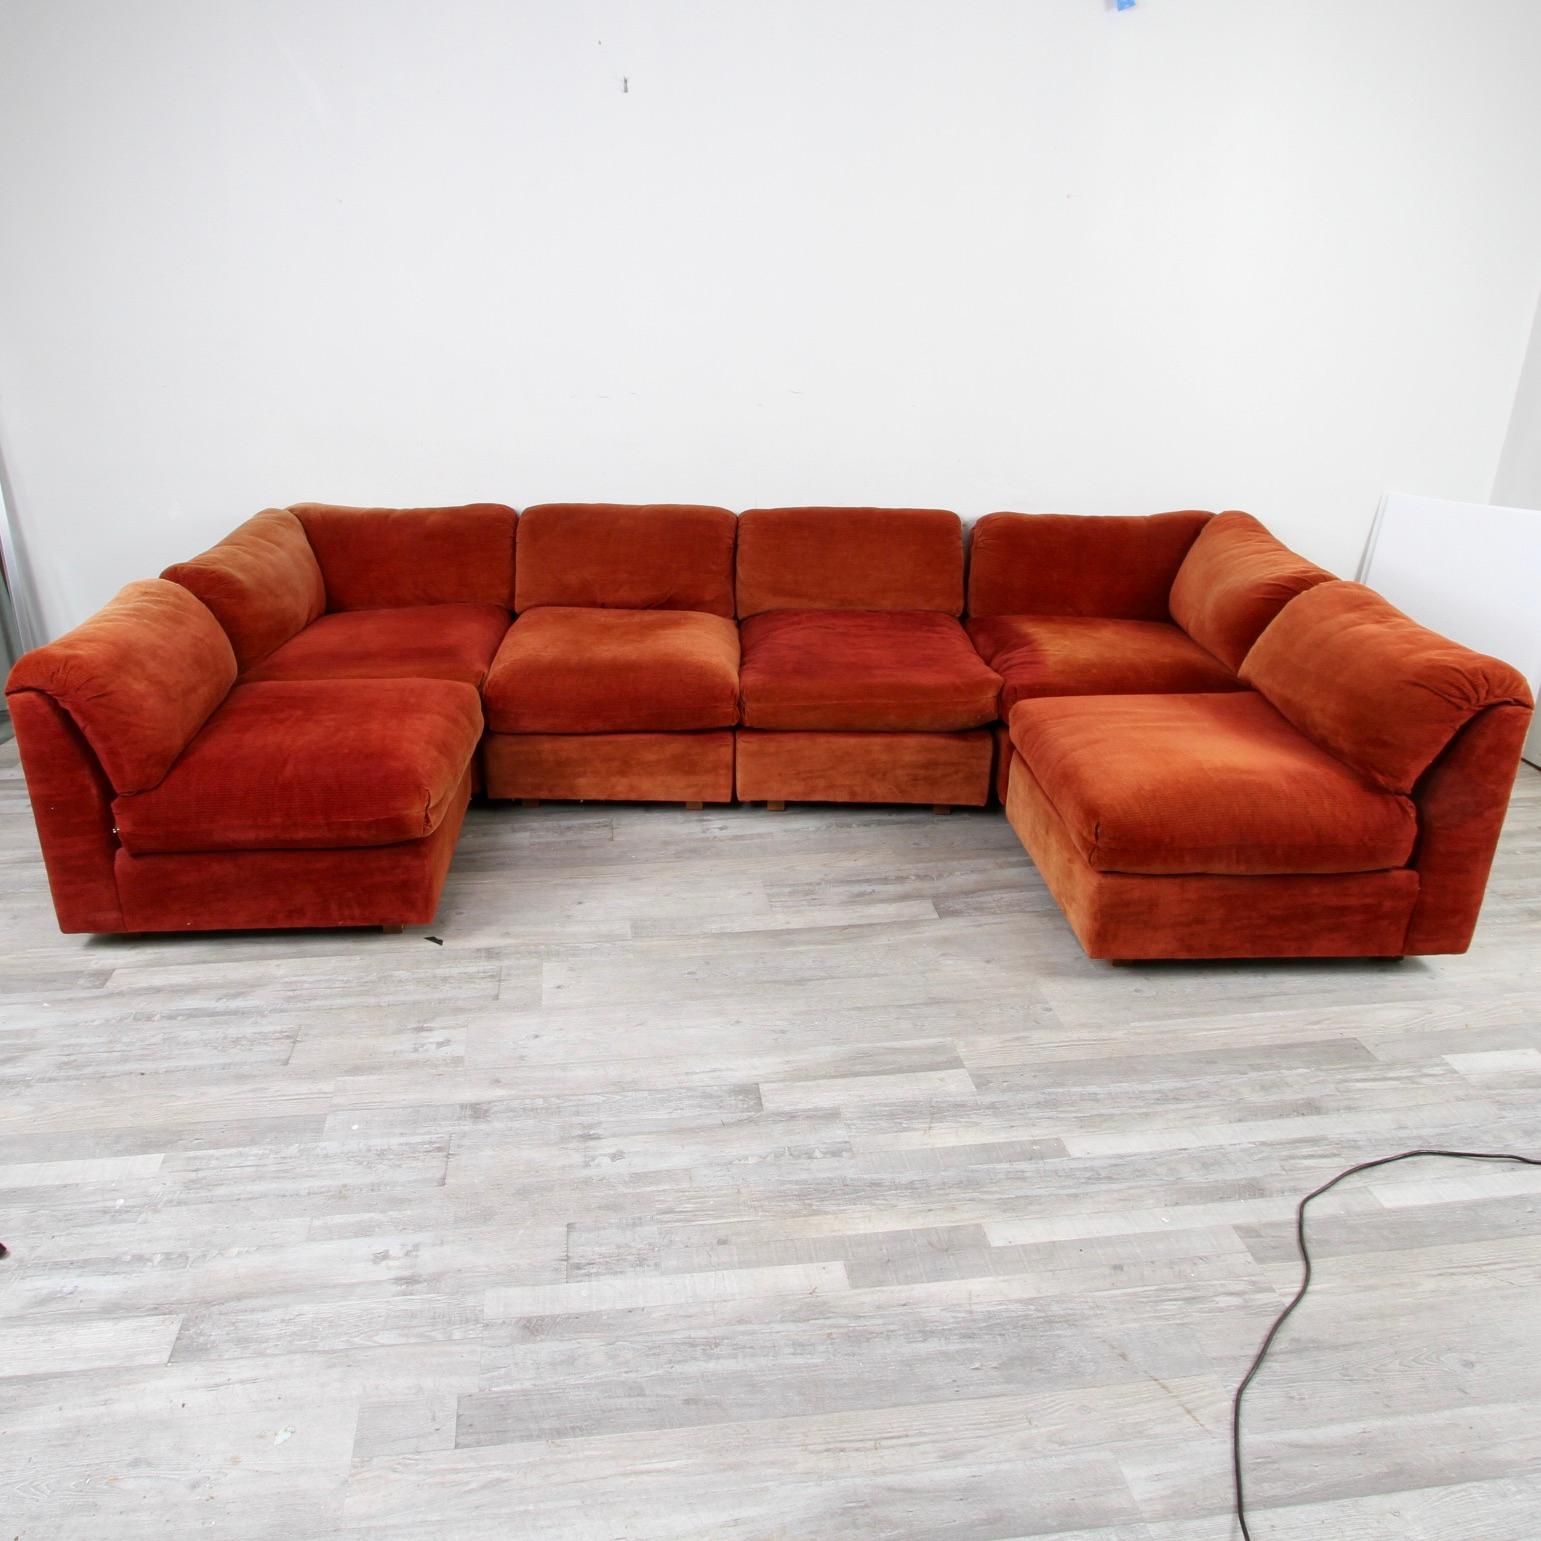 Fresh from the original owners, this iconic 70s corduroy modular sectional sofa is a great candidate for reupholstery. Cushions still have clean, foam and springs. Sun fading on a few sections as expected after 50 years.